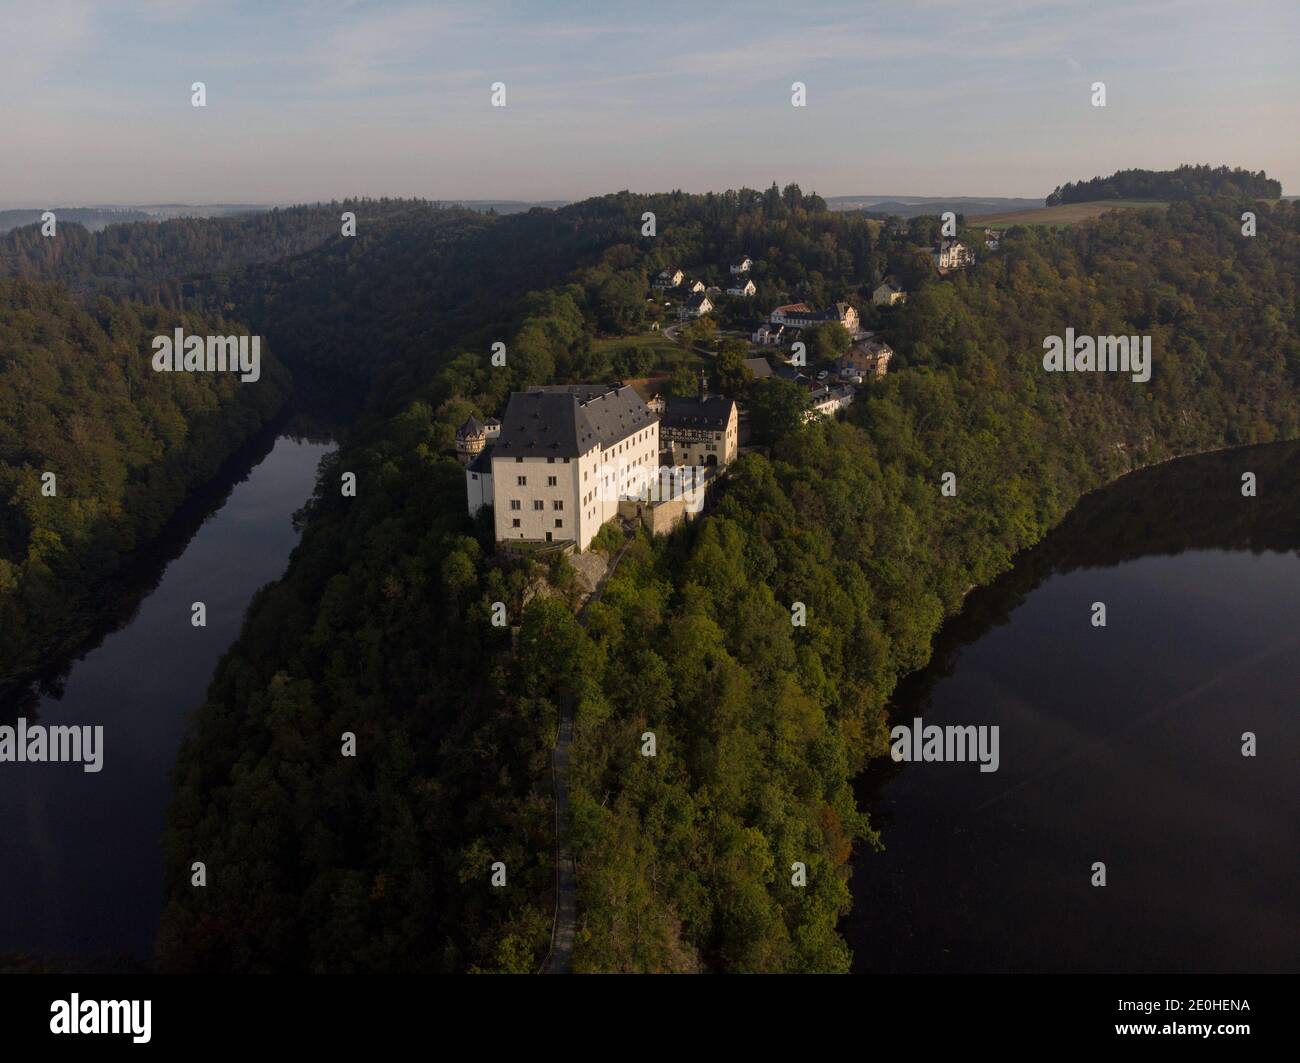 Panoramic view of Schloss Burgk castle and river Saale Thuringian Highlands Slate Mountains in Saale-Orla-Kreis Thuringia Germany Stock Photo